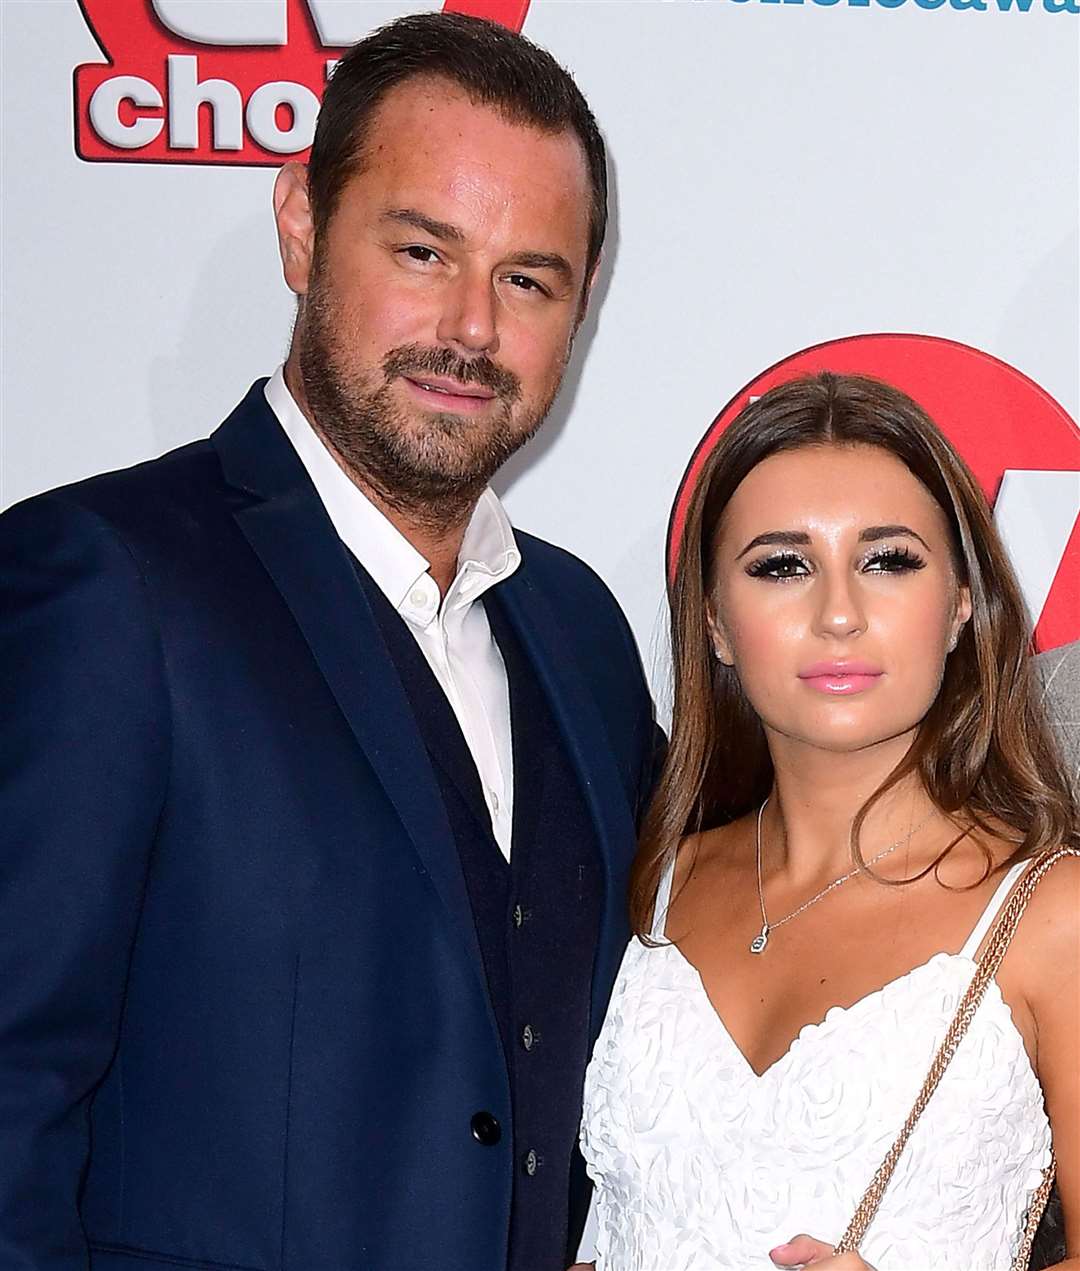 Dani Dyer and her father Danny Dyer. Picture: Ian West